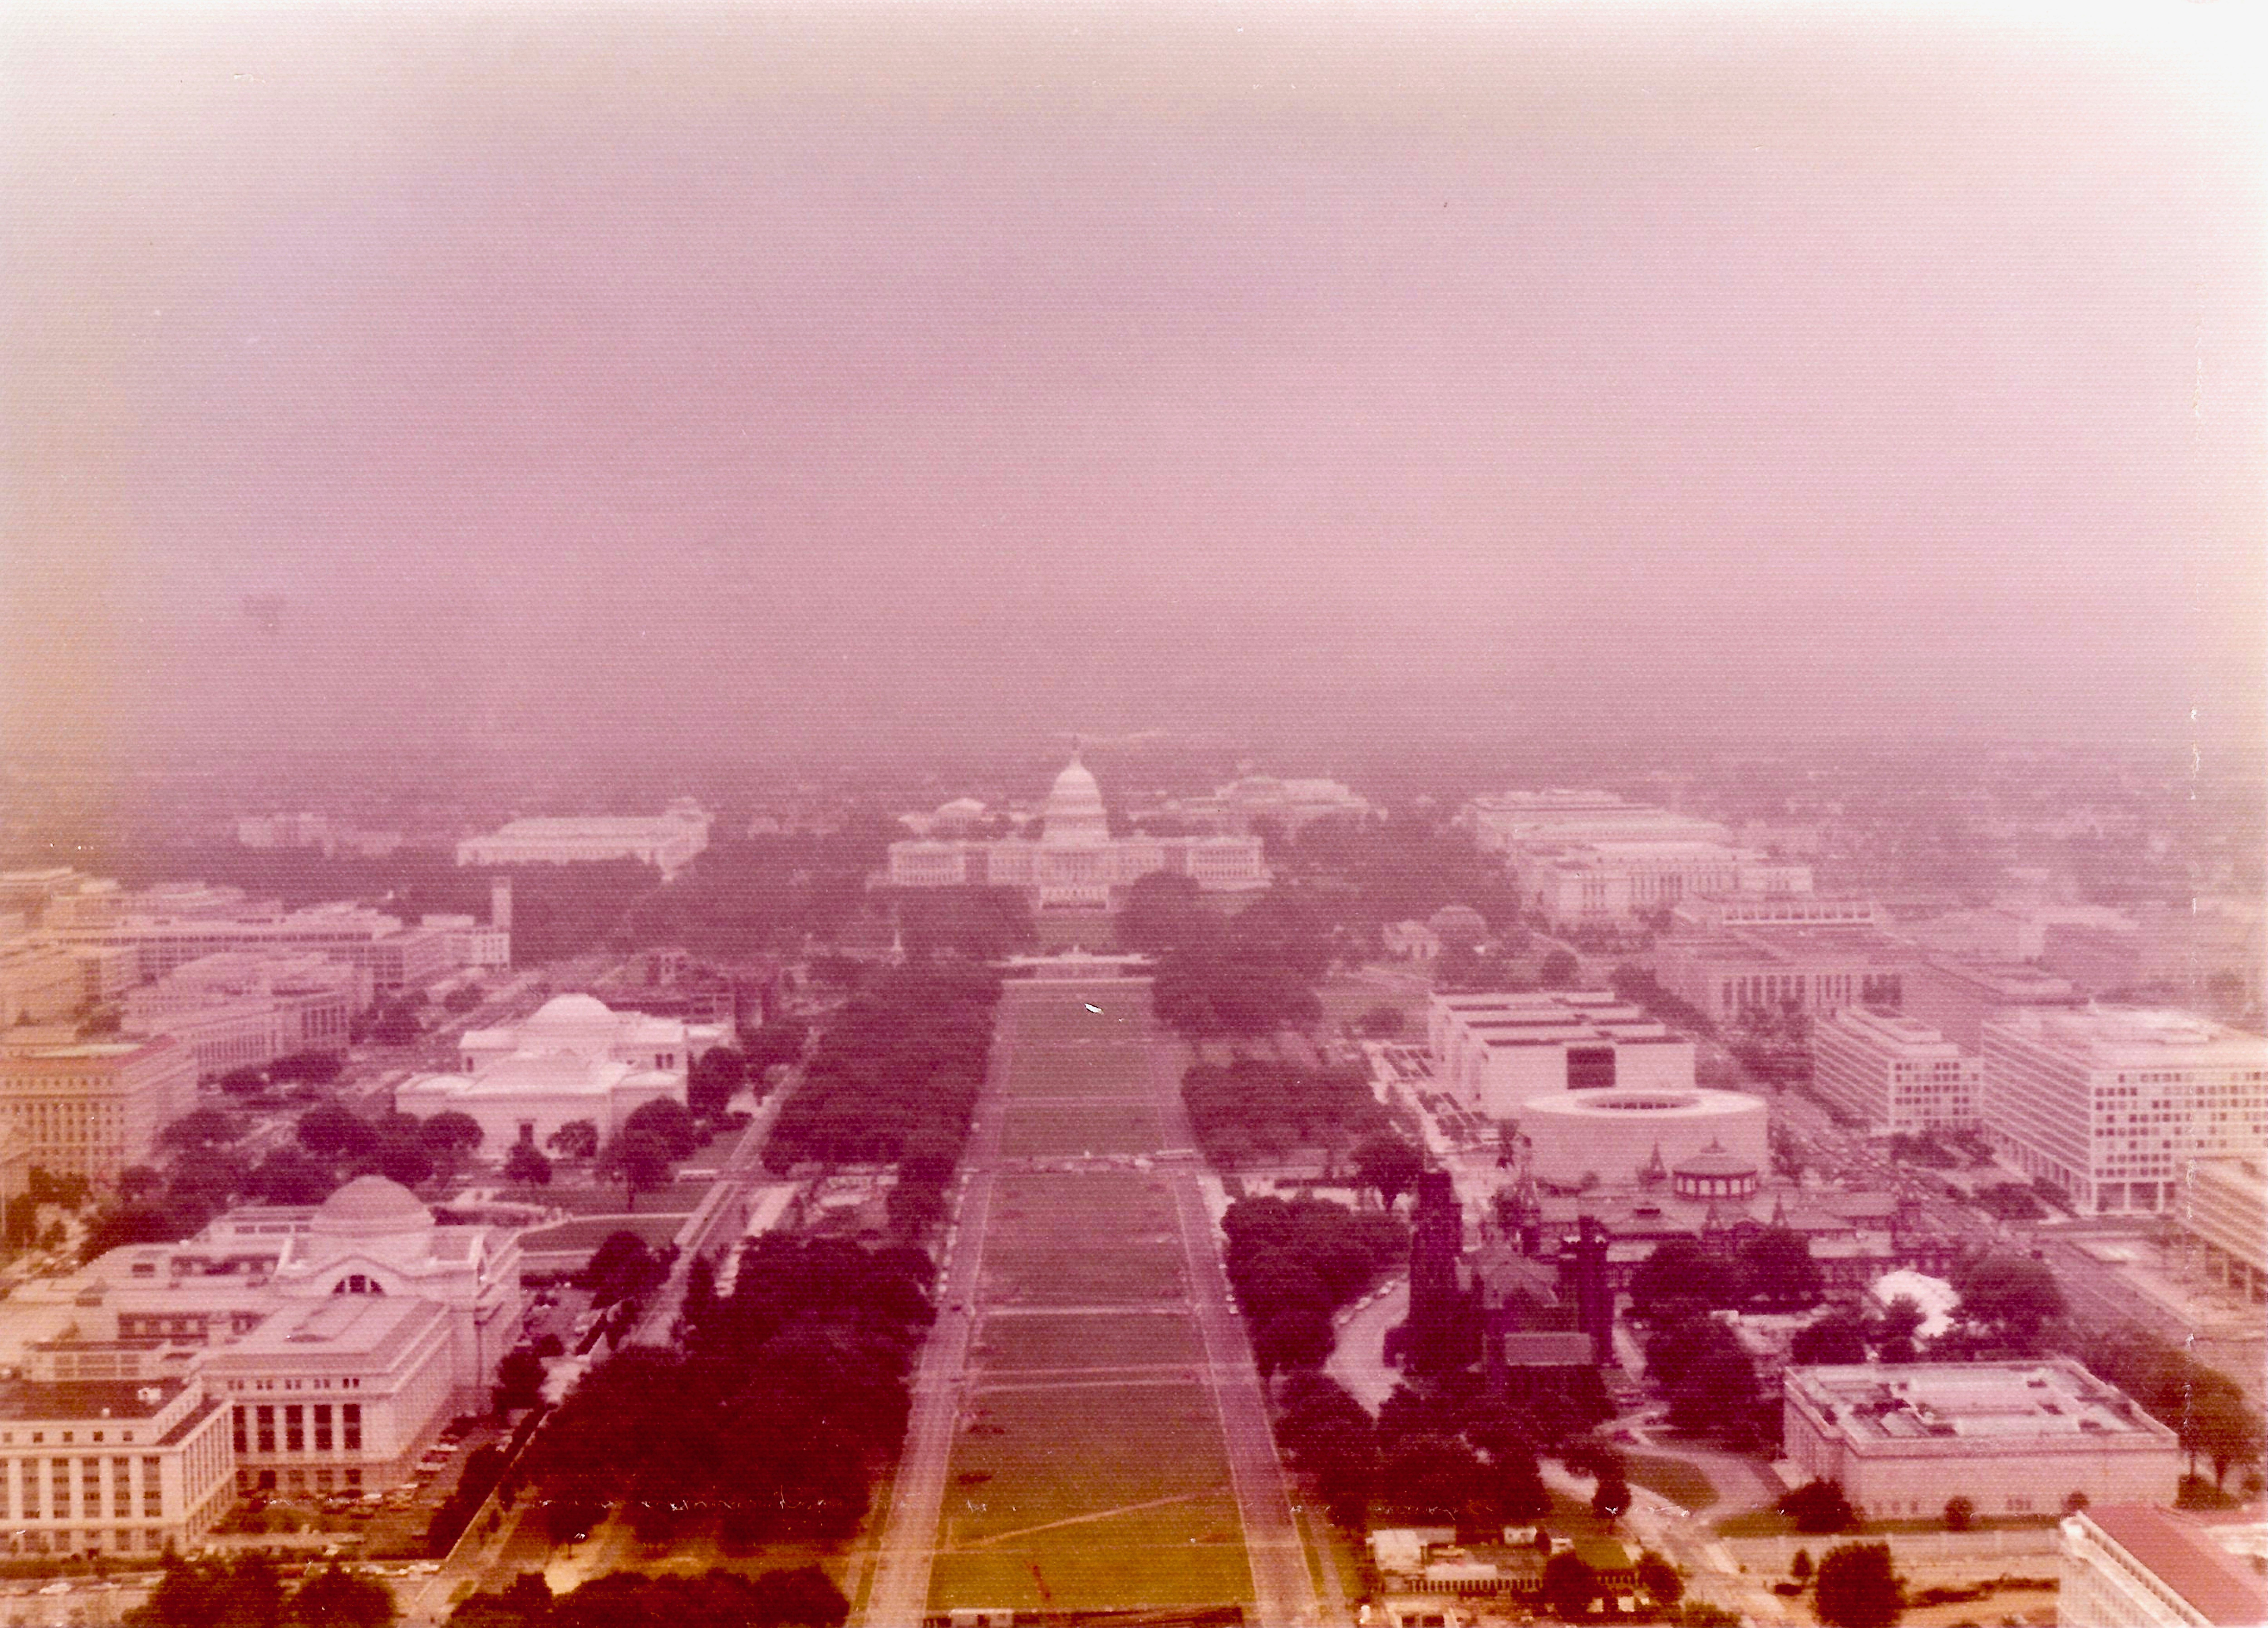 Washington D C August 1975 - Capitol from the Washington Monument - Washington, D. C., August 1975.